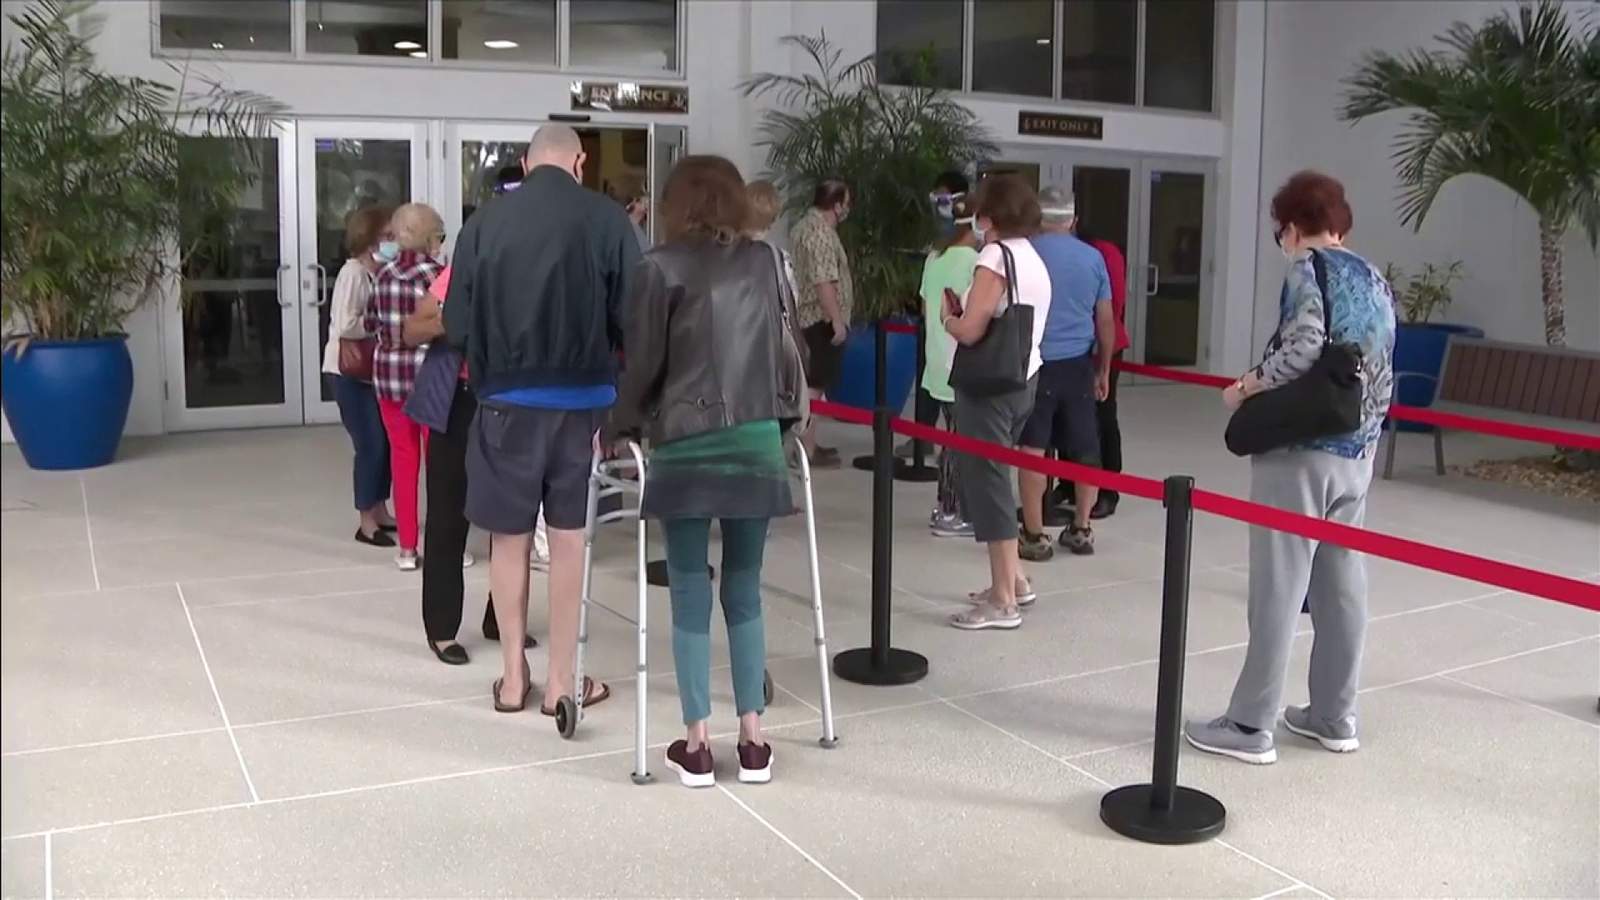 Seniors wait in long lines just to sign up for vaccine appointments